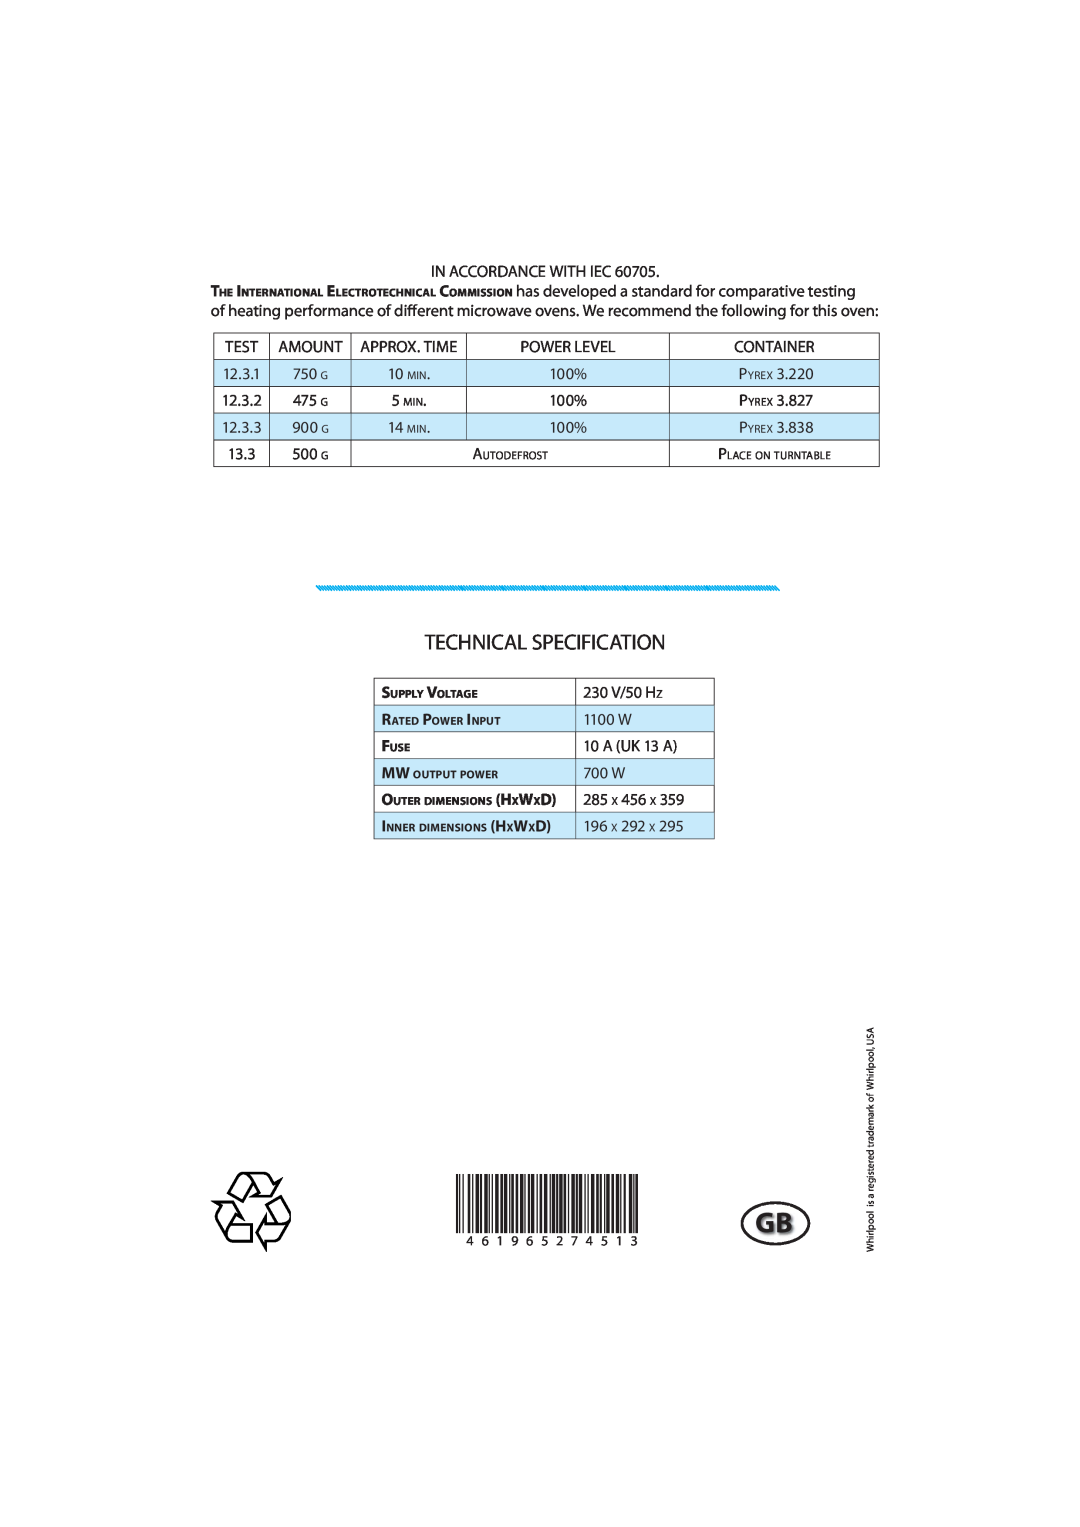 Whirlpool MWD 207 manual Technical Specification, 230 V/50 H Z, 1100 W, A UK 13 A, 700 W, 285 X 456, 196 